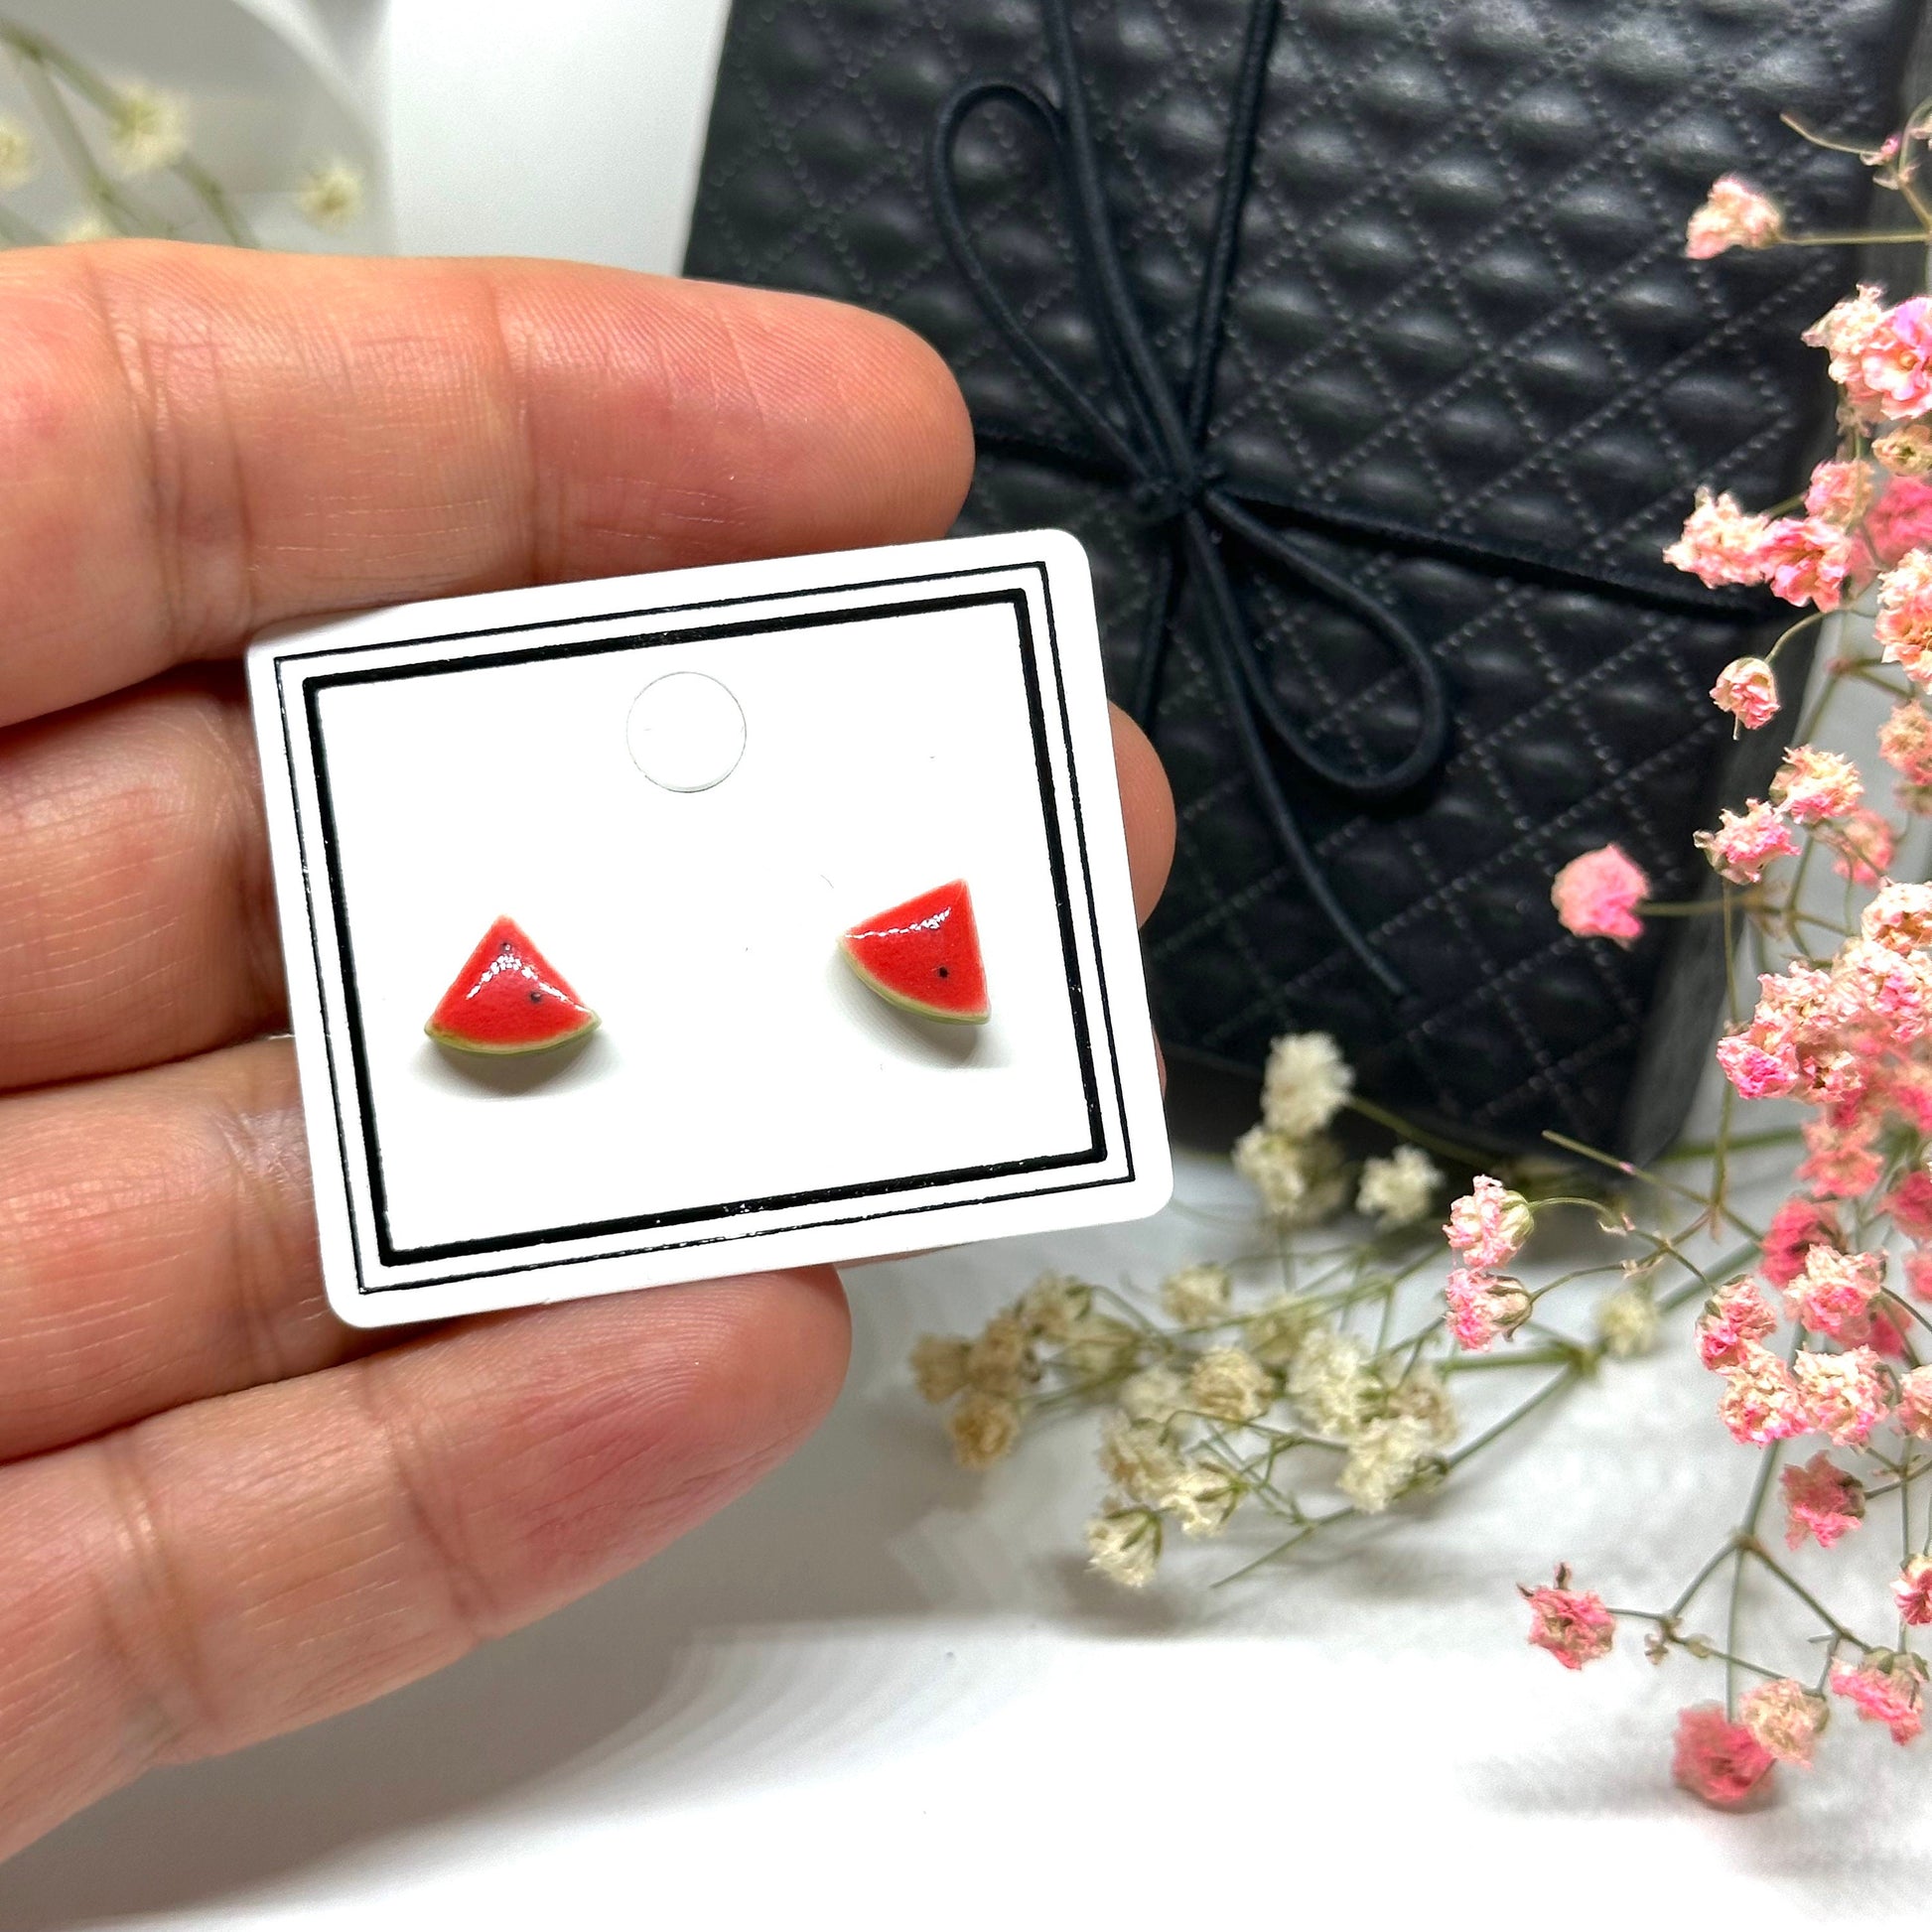 Cute Tiny Watermelon Stud Earrings Ceramic Jewelry Clay Summer Fashion for Girls Casual Urban Outfit Minimalist Style Aretes Ceramica Sandia